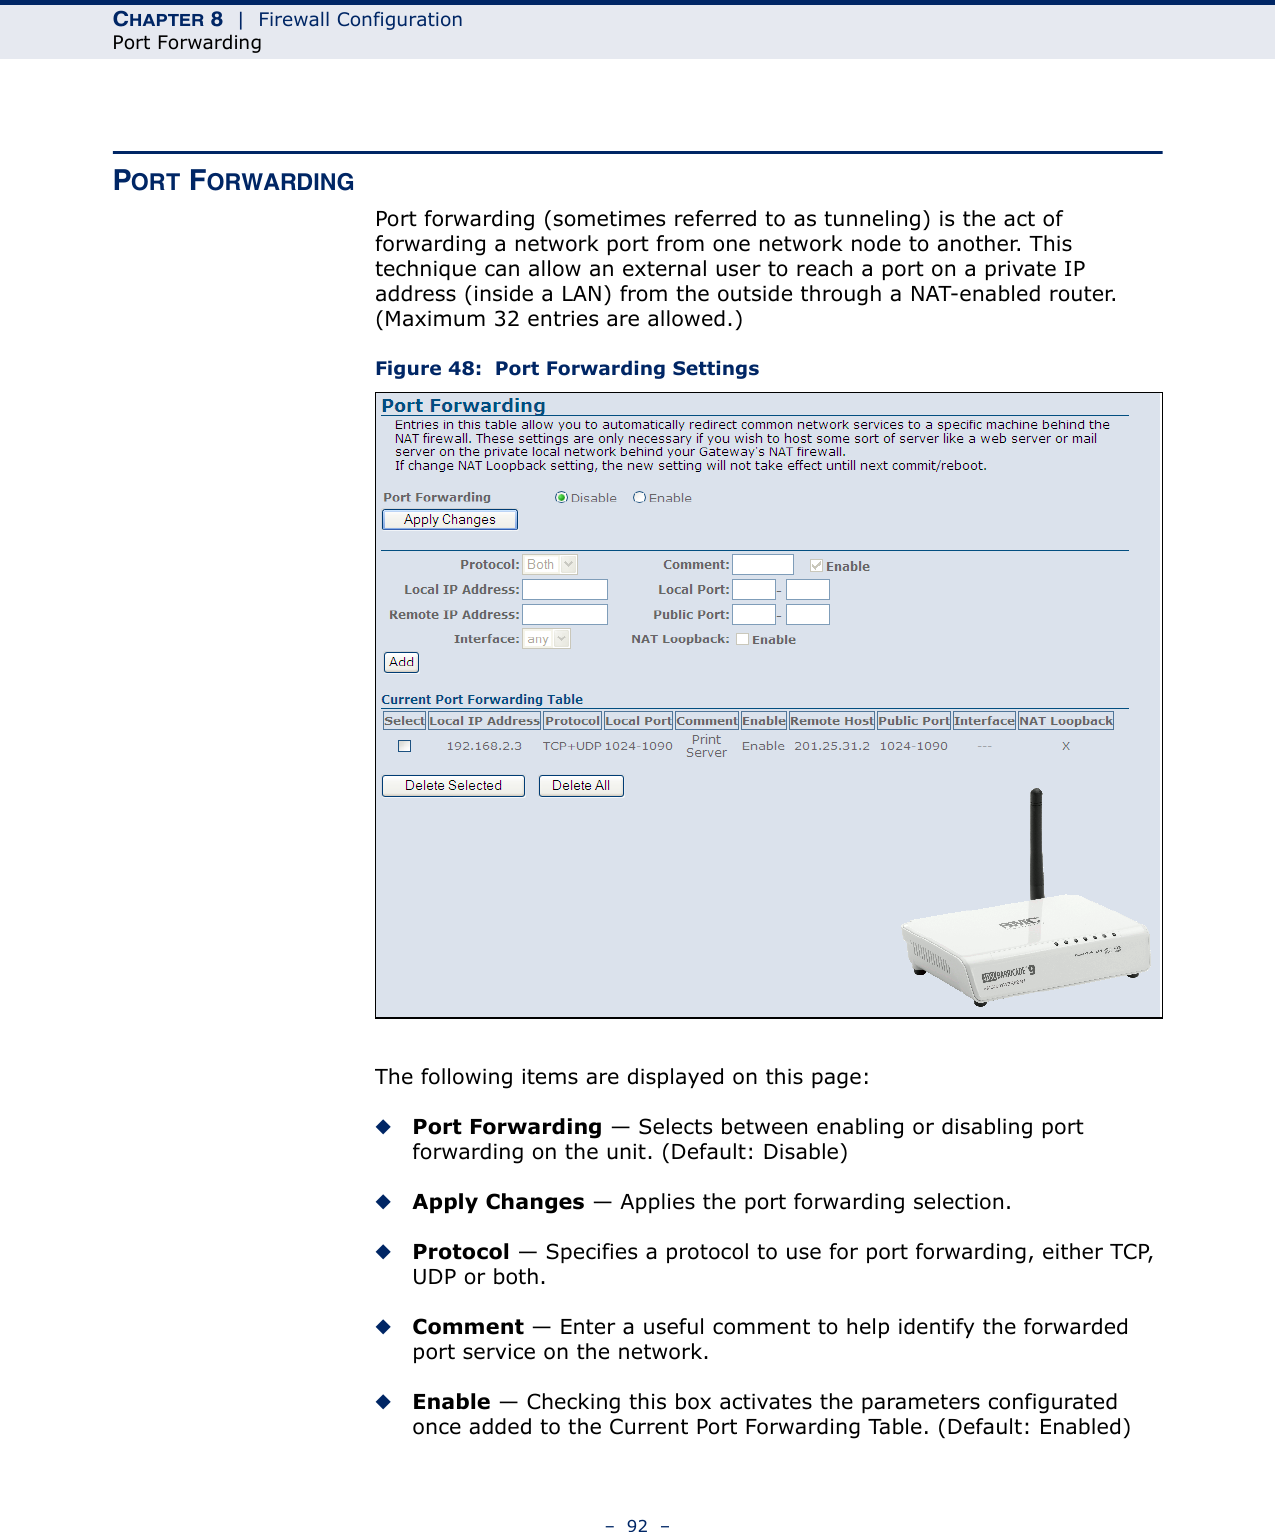 CHAPTER 8  |  Firewall ConfigurationPort Forwarding–  92  –PORT FORWARDINGPort forwarding (sometimes referred to as tunneling) is the act of forwarding a network port from one network node to another. This technique can allow an external user to reach a port on a private IP address (inside a LAN) from the outside through a NAT-enabled router. (Maximum 32 entries are allowed.)Figure 48:  Port Forwarding SettingsThe following items are displayed on this page:◆Port Forwarding — Selects between enabling or disabling port forwarding on the unit. (Default: Disable)◆Apply Changes — Applies the port forwarding selection.◆Protocol — Specifies a protocol to use for port forwarding, either TCP, UDP or both.◆Comment — Enter a useful comment to help identify the forwarded port service on the network.◆Enable — Checking this box activates the parameters configurated once added to the Current Port Forwarding Table. (Default: Enabled)